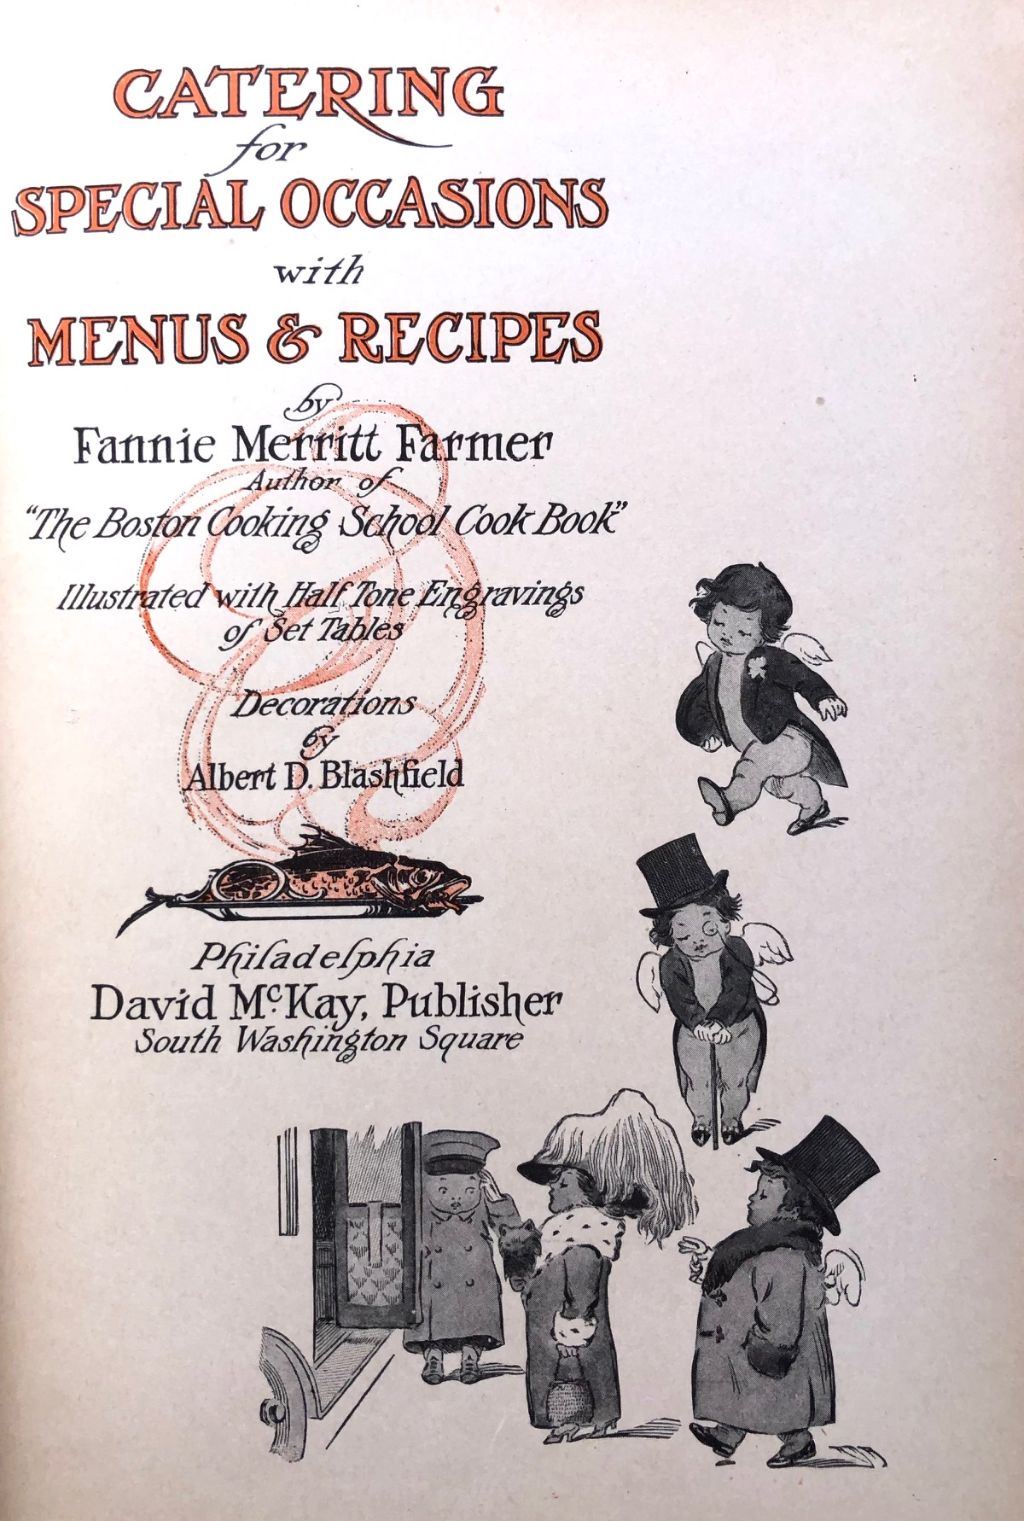 (Holidays) Farmer, Fannie Merritt. Catering for Special Occasions